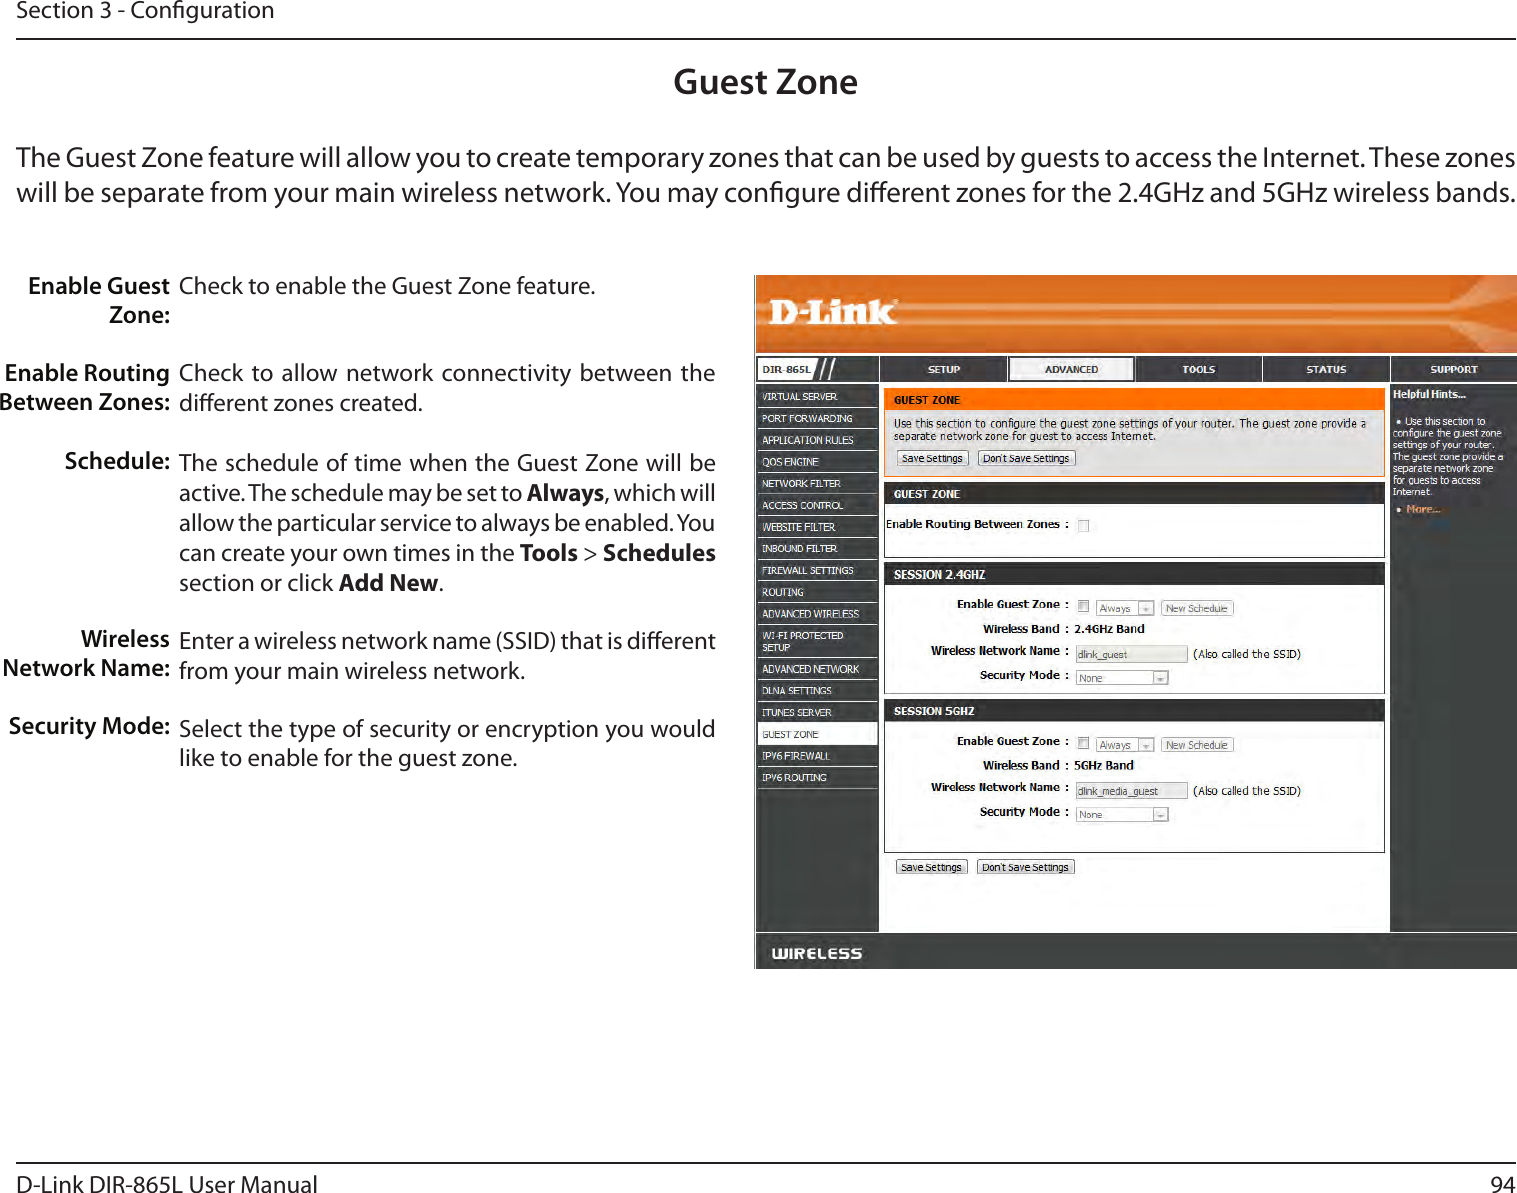 94D-Link DIR-865L User ManualSection 3 - CongurationGuest ZoneCheck to enable the Guest Zone feature. Check to allow network connectivity  between the dierent zones created. The schedule of time when the Guest Zone will be active. The schedule may be set to Always, which will allow the particular service to always be enabled. You can create your own times in the Tools &gt; Schedules section or click Add New.Enter a wireless network name (SSID) that is dierent from your main wireless network.Select the type of security or encryption you would like to enable for the guest zone.  Enable Guest Zone:Enable Routing Between Zones:Schedule:Wireless Network Name:Security Mode:The Guest Zone feature will allow you to create temporary zones that can be used by guests to access the Internet. These zones will be separate from your main wireless network. You may congure dierent zones for the 2.4GHz and 5GHz wireless bands.